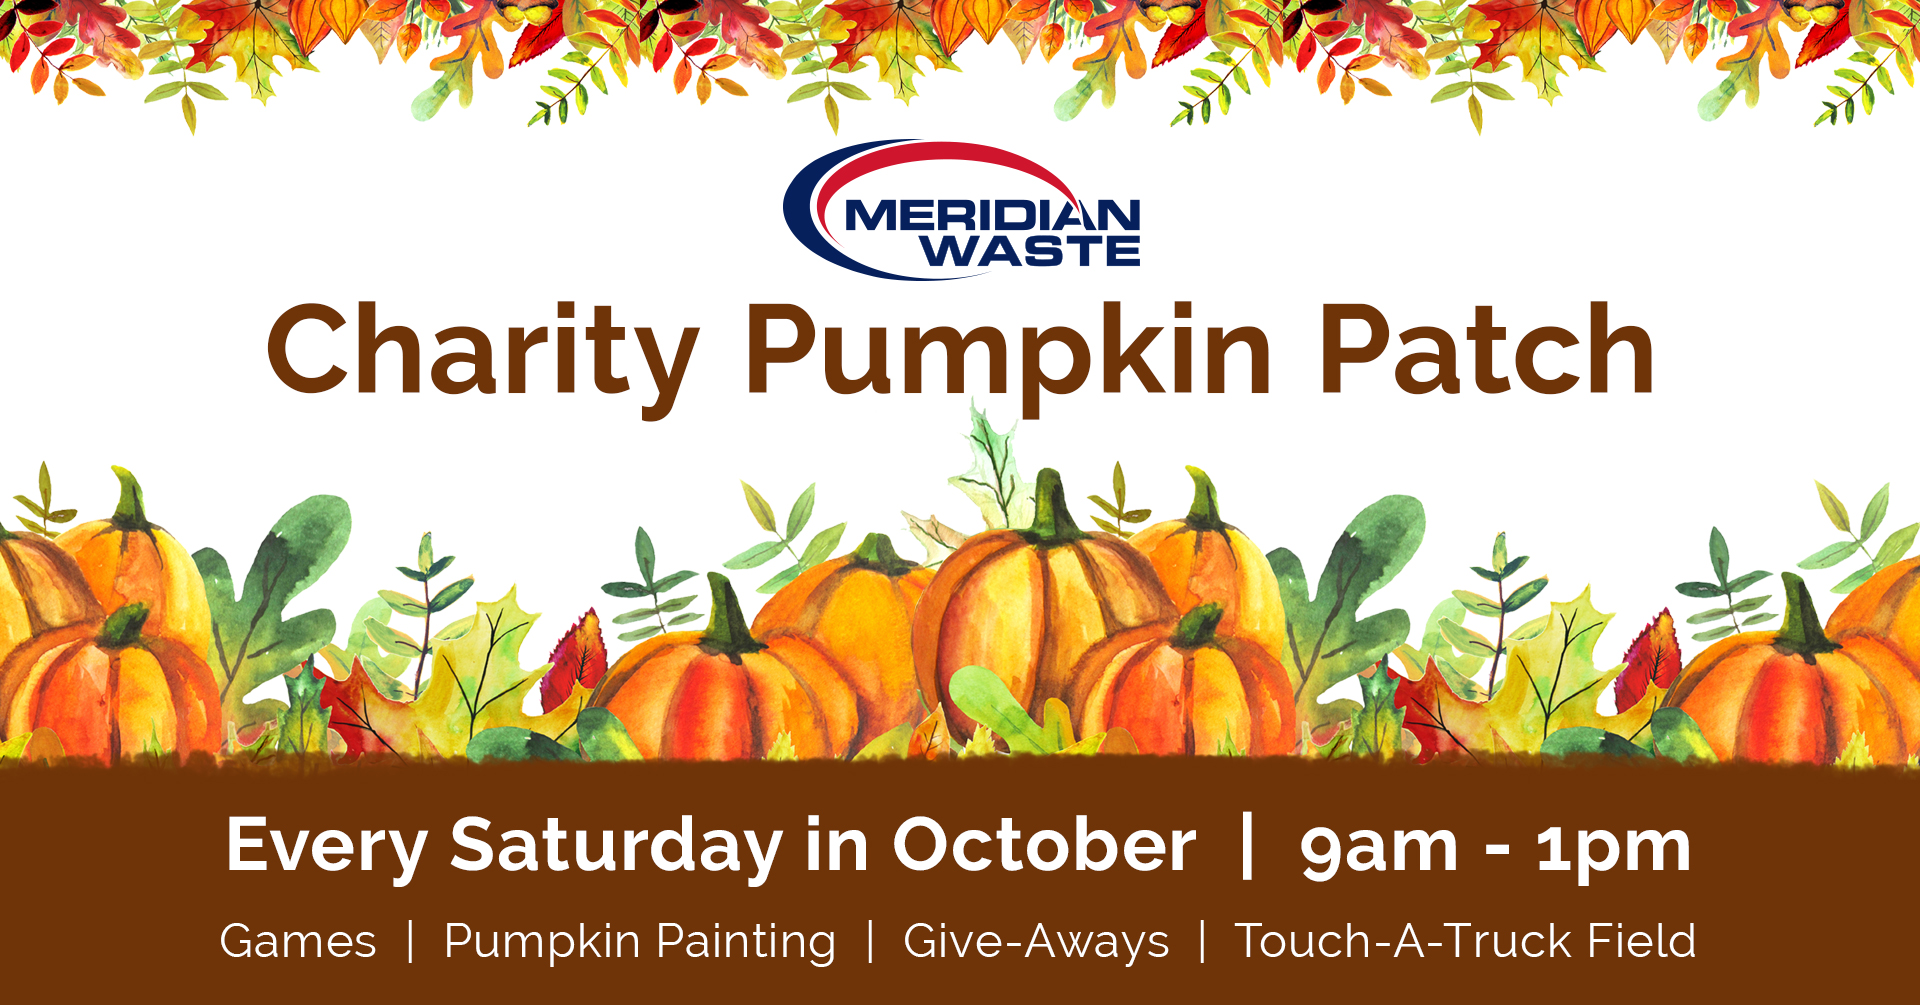 MERIDIAN WASTE CHARITY PUMPKIN PATCH SUPPORTS THE LOCAL COMMUNITY